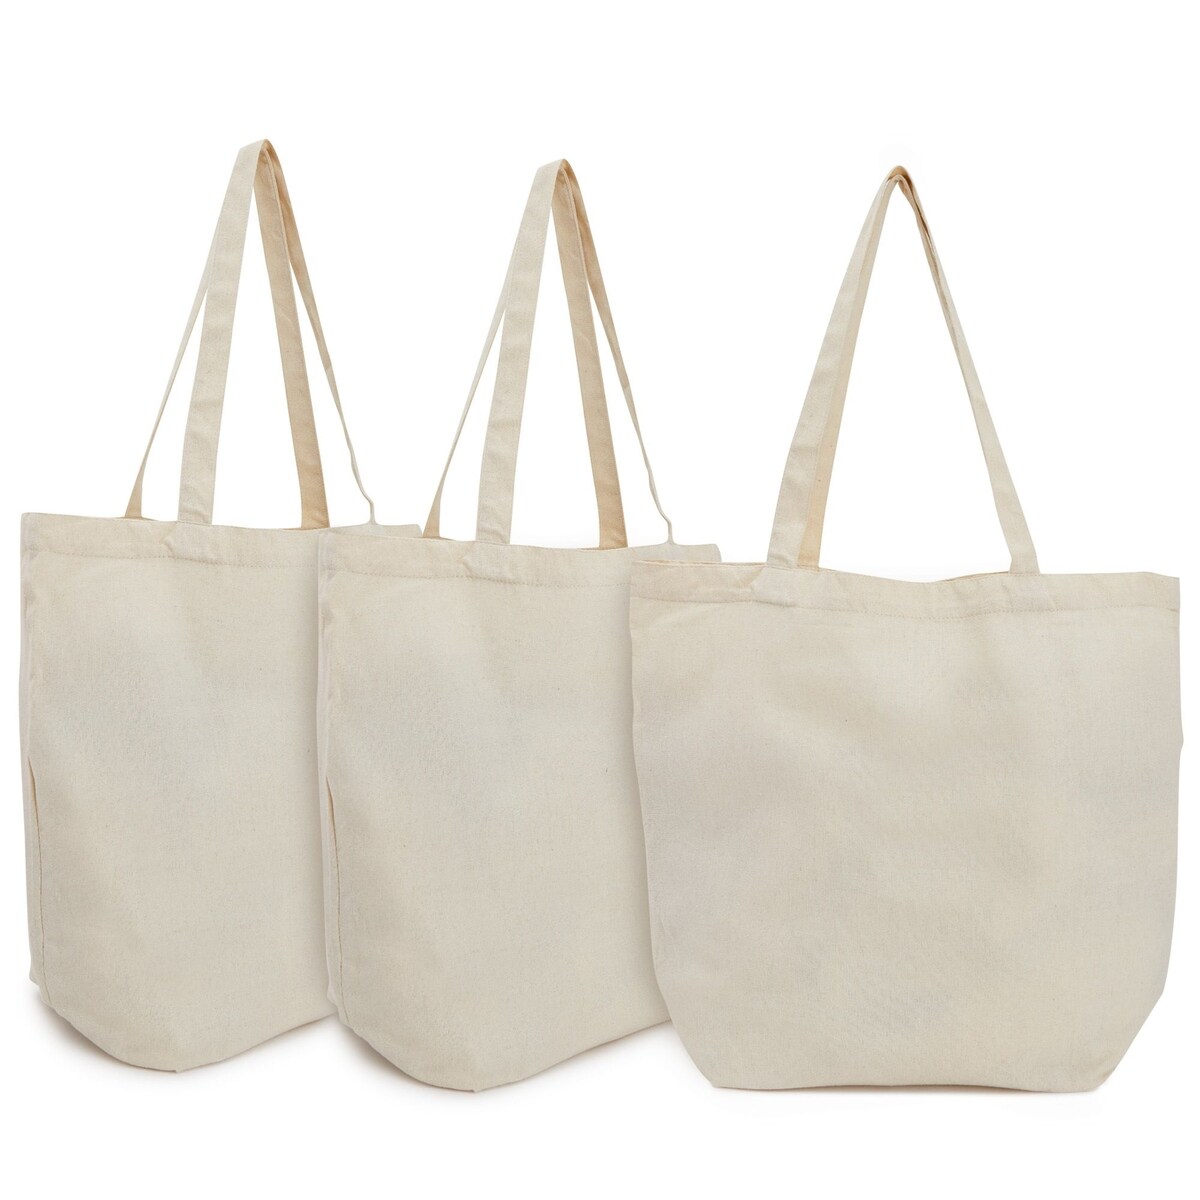 Cotton Grocery Bags, Grocery Shopping Bags, Over-the-shoulder tote bag